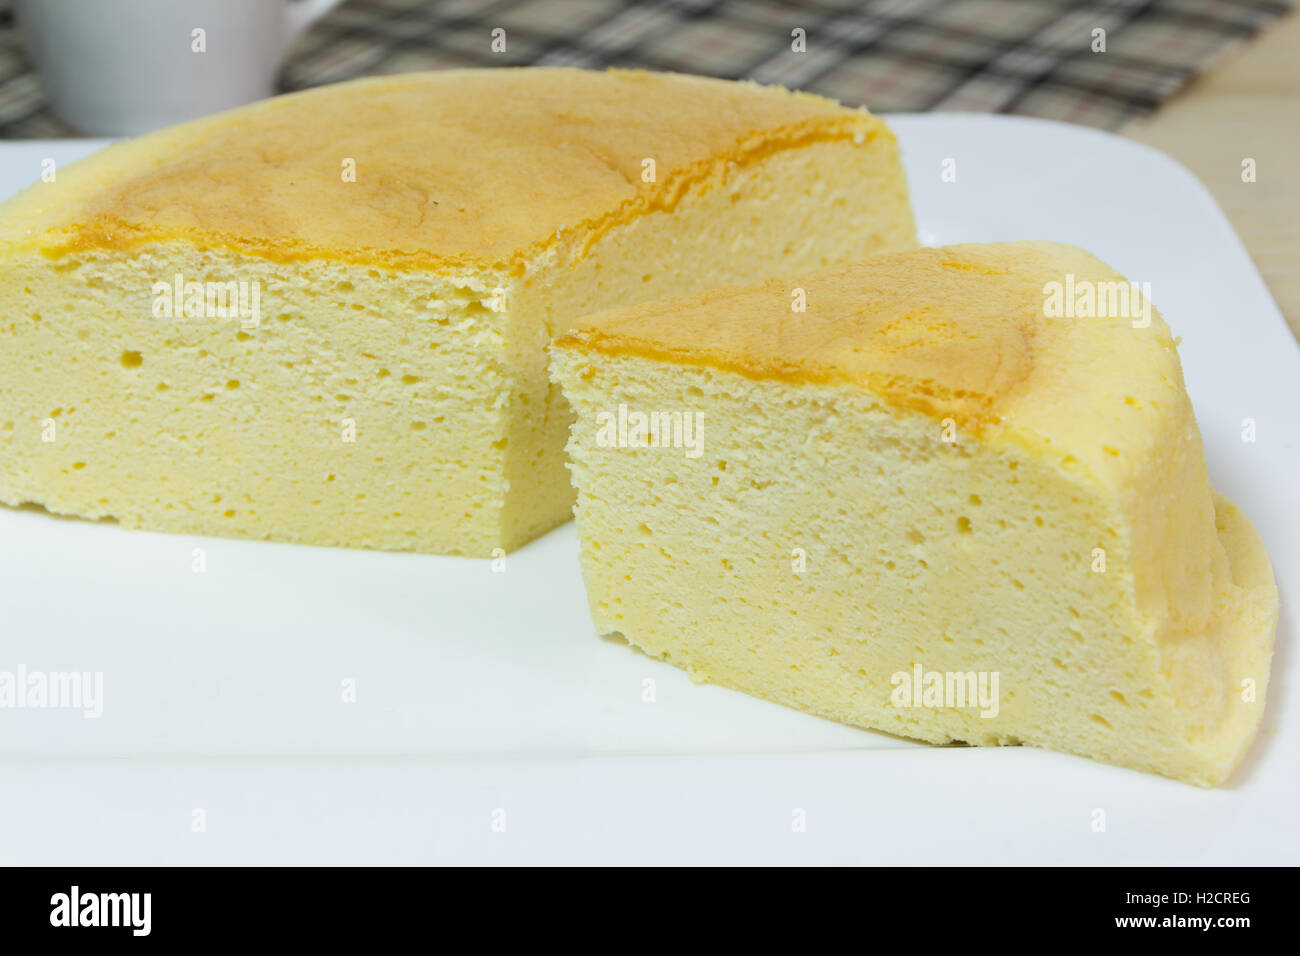 Cheesecake coton on white plate Banque D'Images